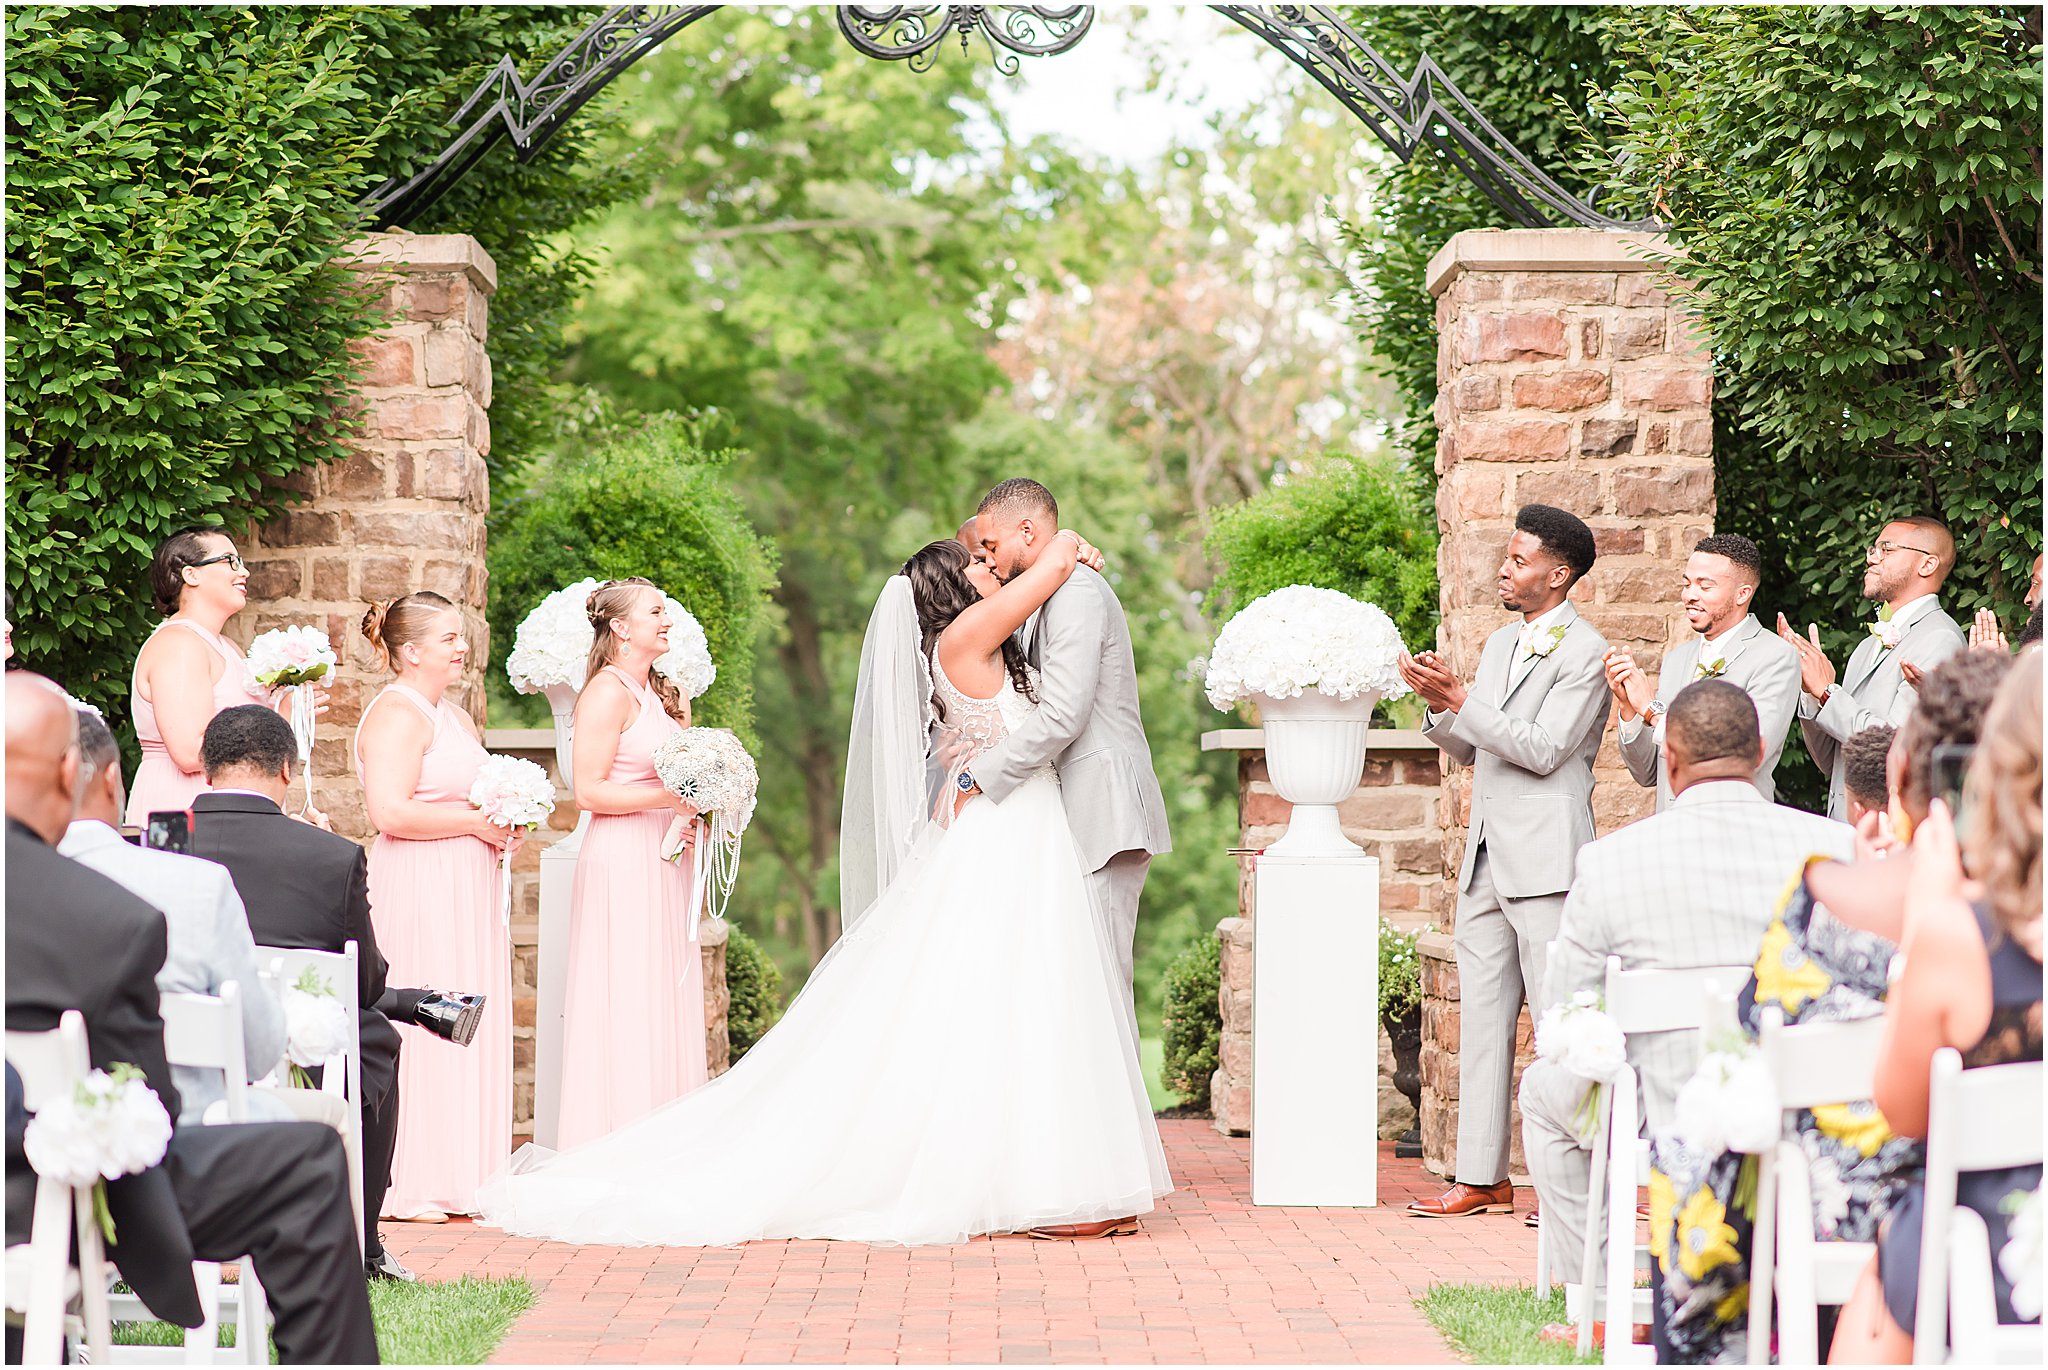 Husband and wife first kiss during outdoor ceremony at Pinnacle Golf Club | Courtney Carney Photography